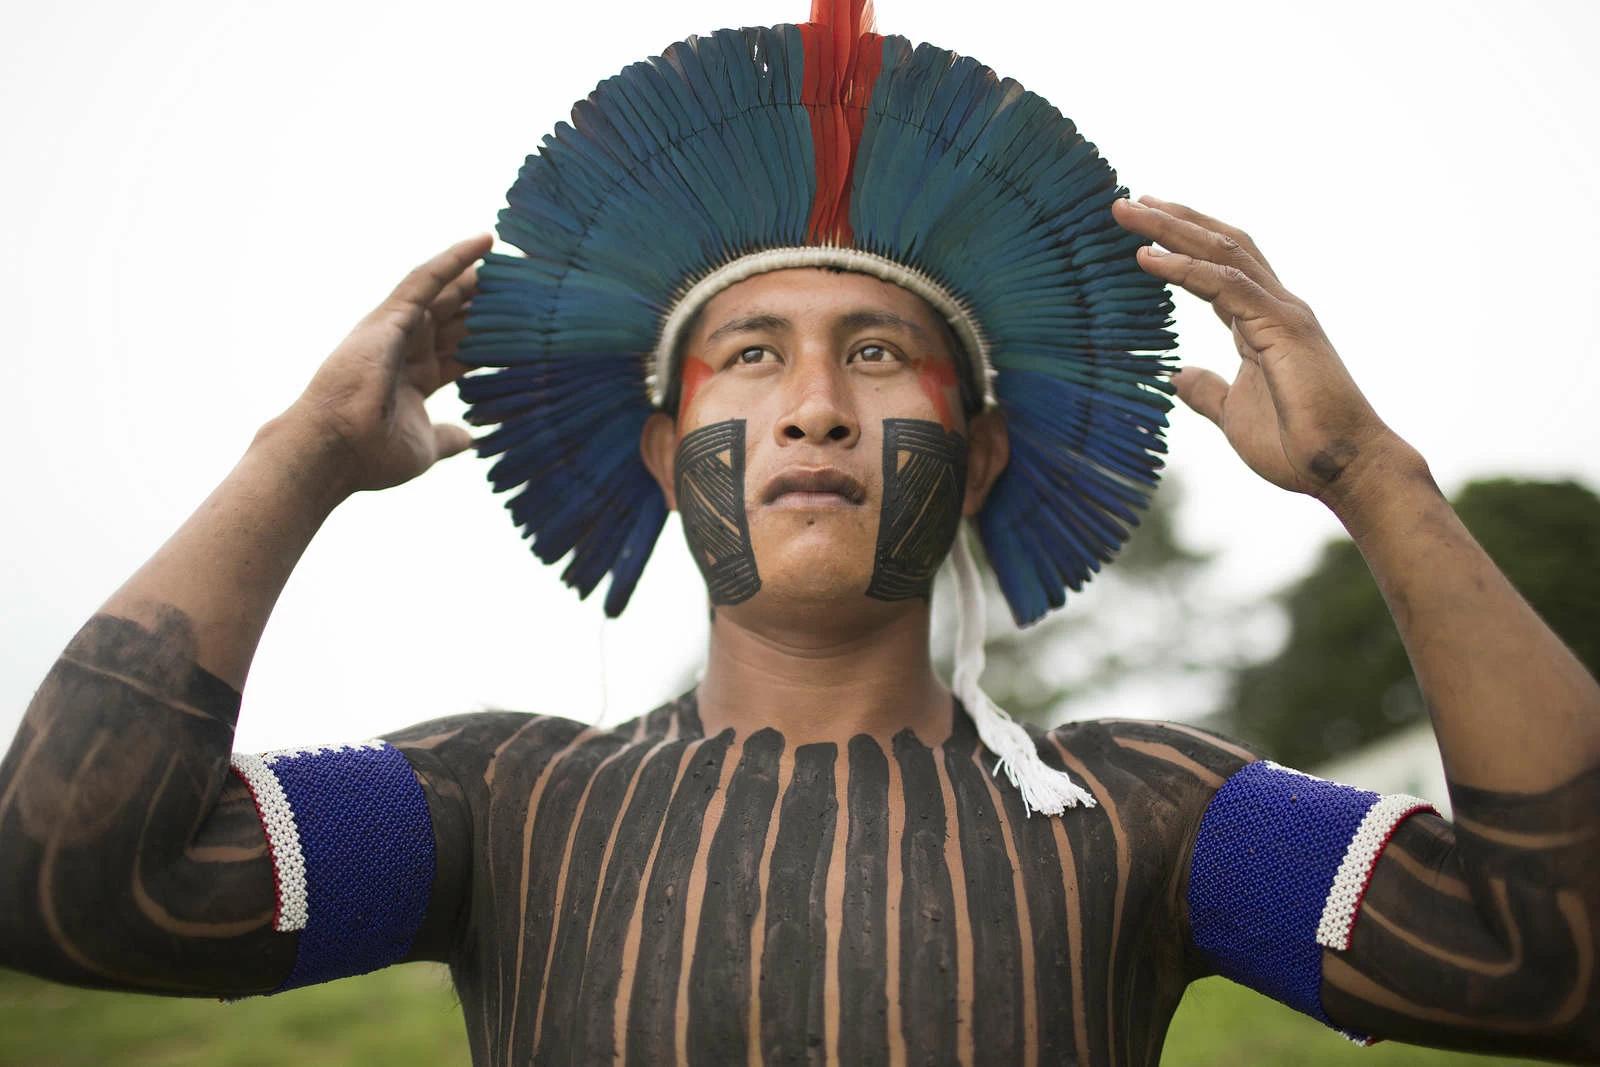 Mukuka, a young Xikrin leader of Poti-Kr village, is a “Warrior of the Knowledge of White Men,” in which he plays a role similar to that of an ambassador. He says he feels stronger and prouder when he is painted and dressed in traditional ceremonial garb. The indigenous Xikrin people live on the Bacaja, a tributary of the Xingu River, where construction of the Belo Monte Dam is reaching peak construction. Some scientists warn that the water level of the Bacaja will decrease precipitously due to the dam. Photo and story credits by Taylor Weidman.